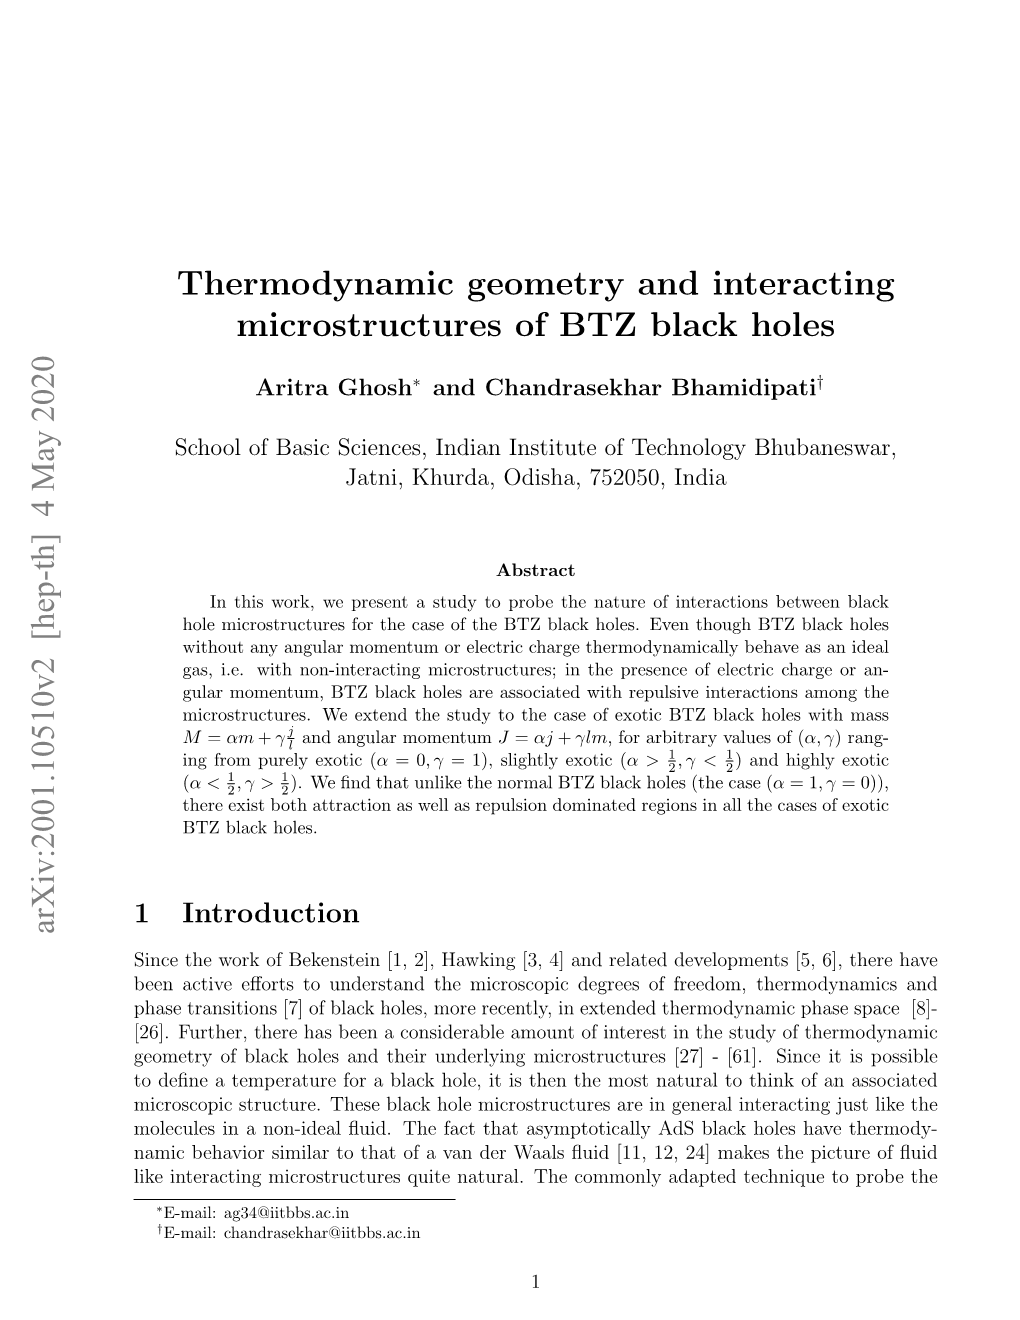 Thermodynamic Geometry and Interacting Microstructures of BTZ Black Holes